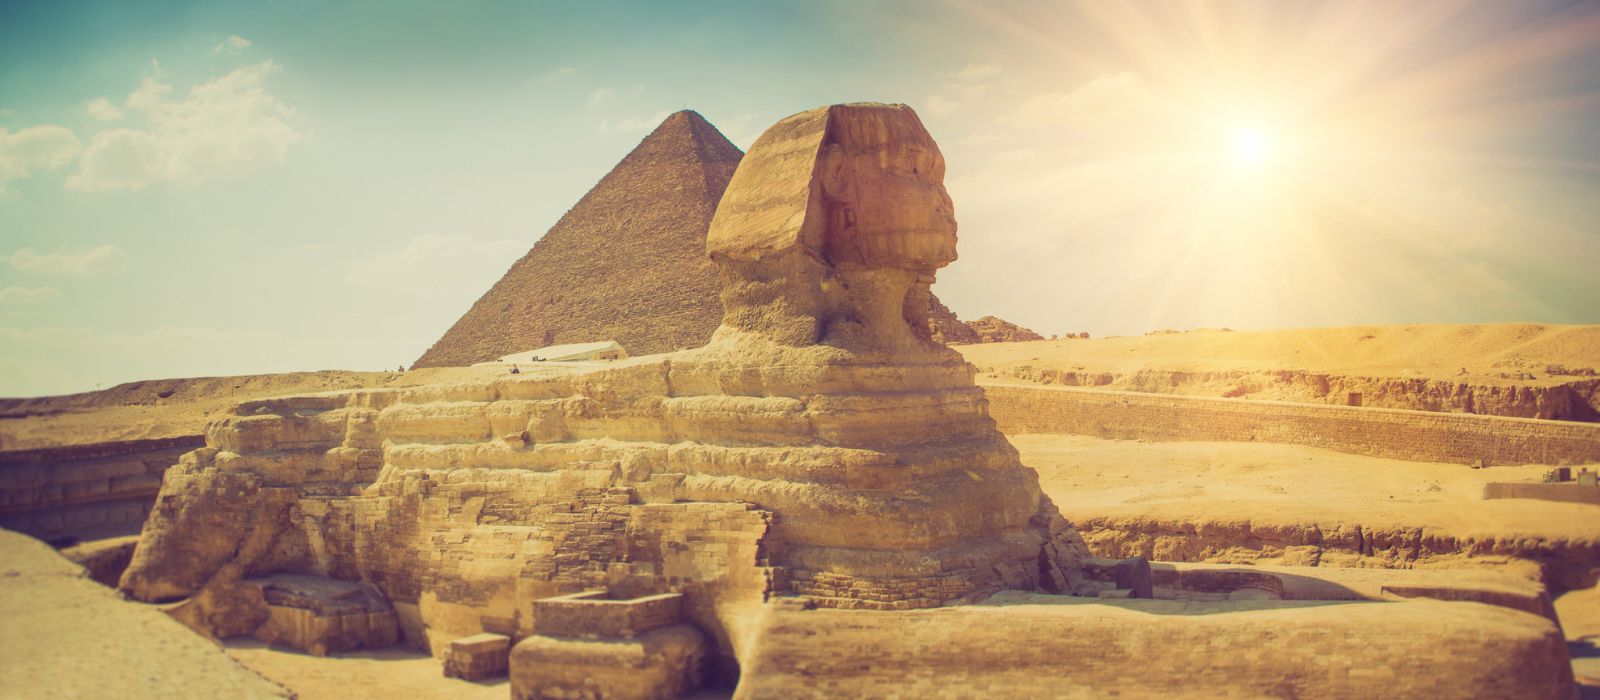 Egypt Holiday Packages | Egypt Tour Packages From India